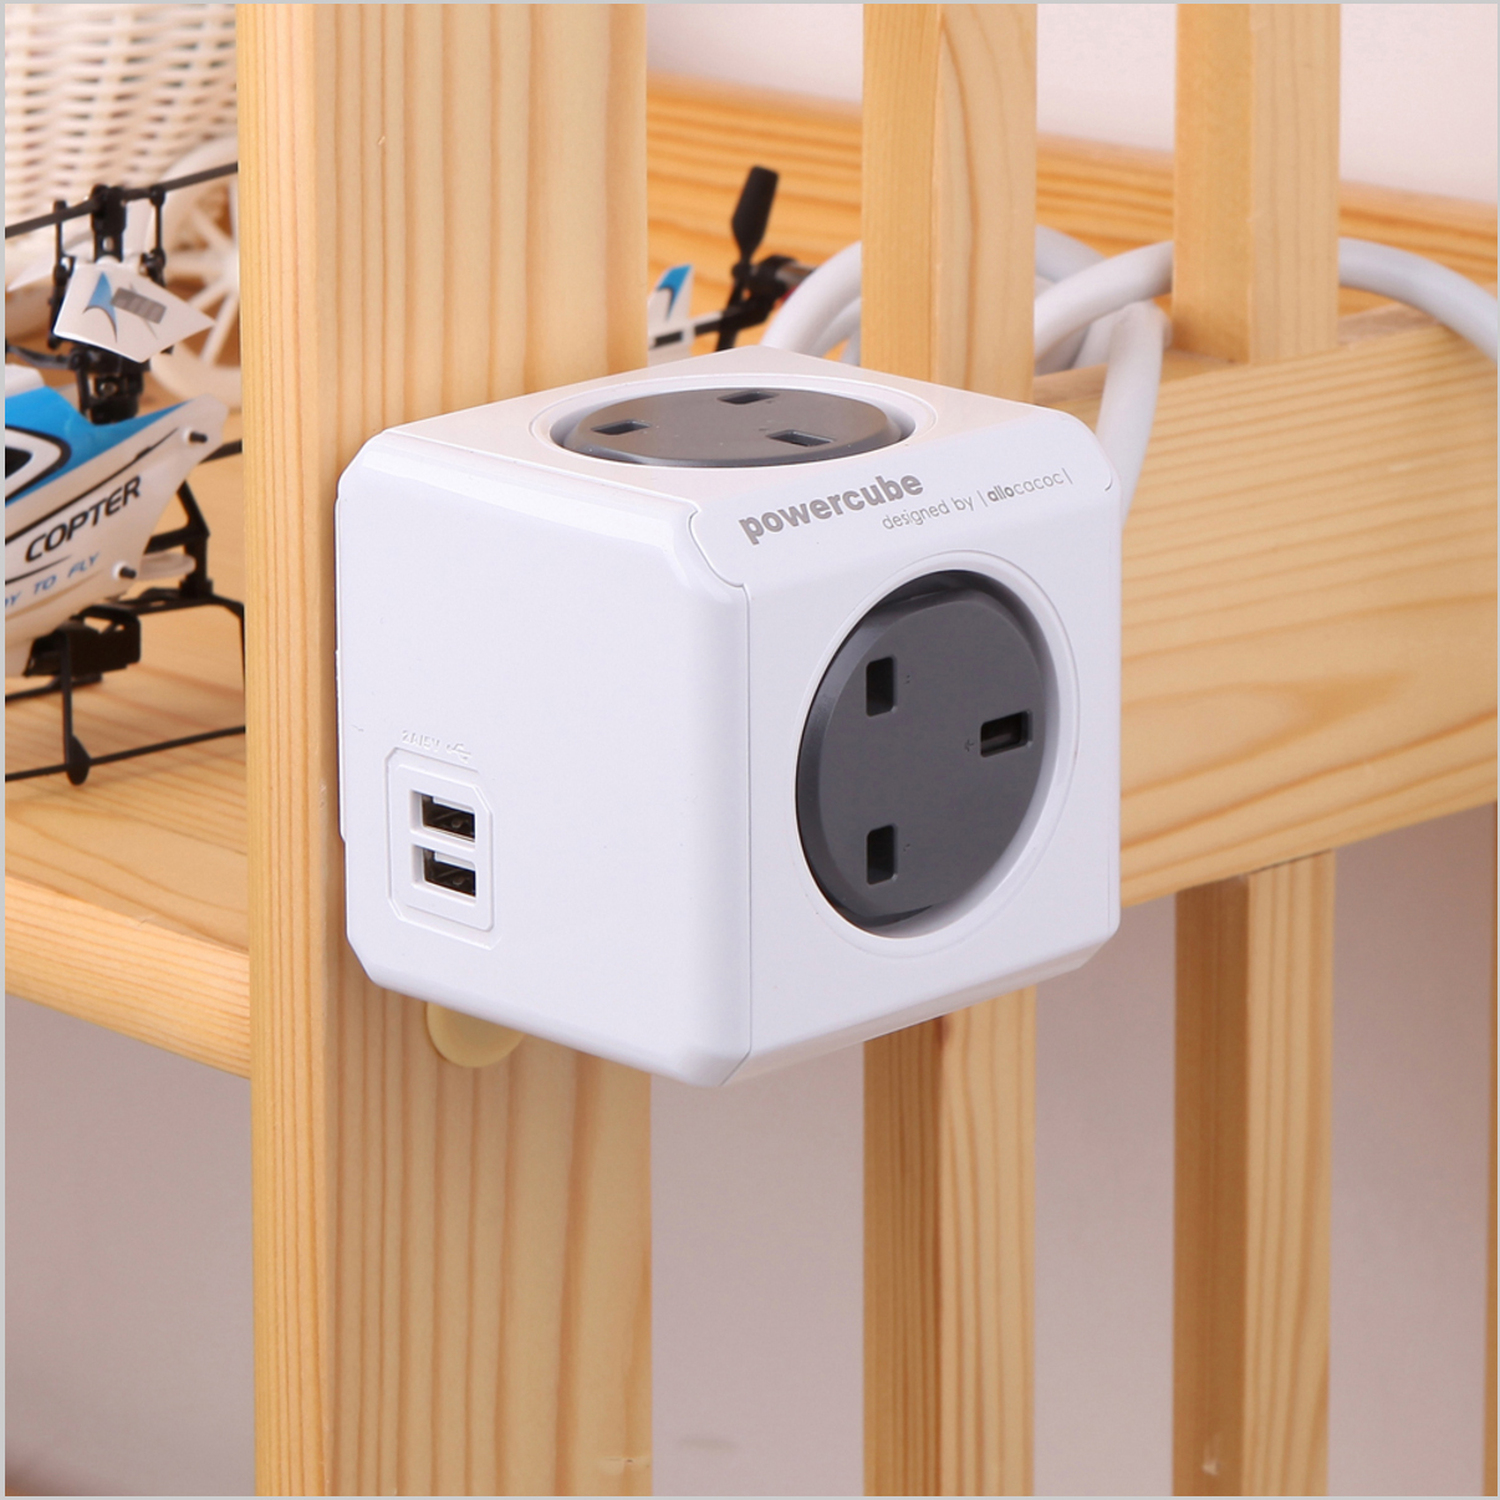 Allocacoc Powercube 1.5m Extension with Dual USB Ports Image 5